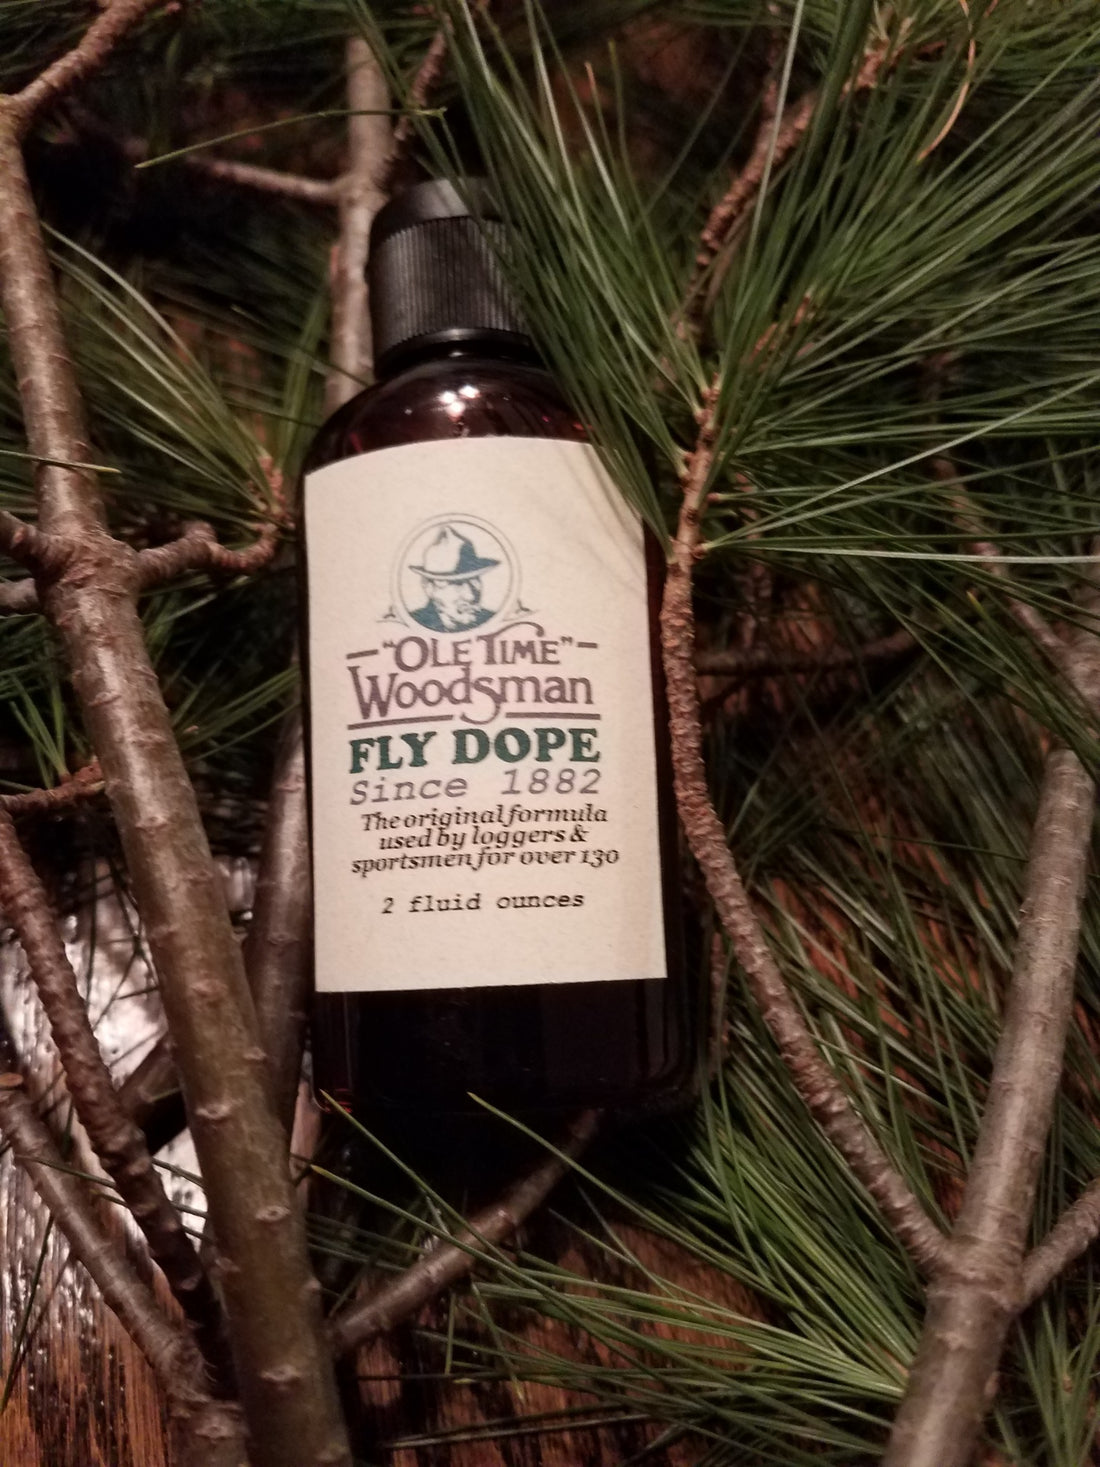 Ole Time Woodsman Fly Dope:  "A Little Dab will do Ya!